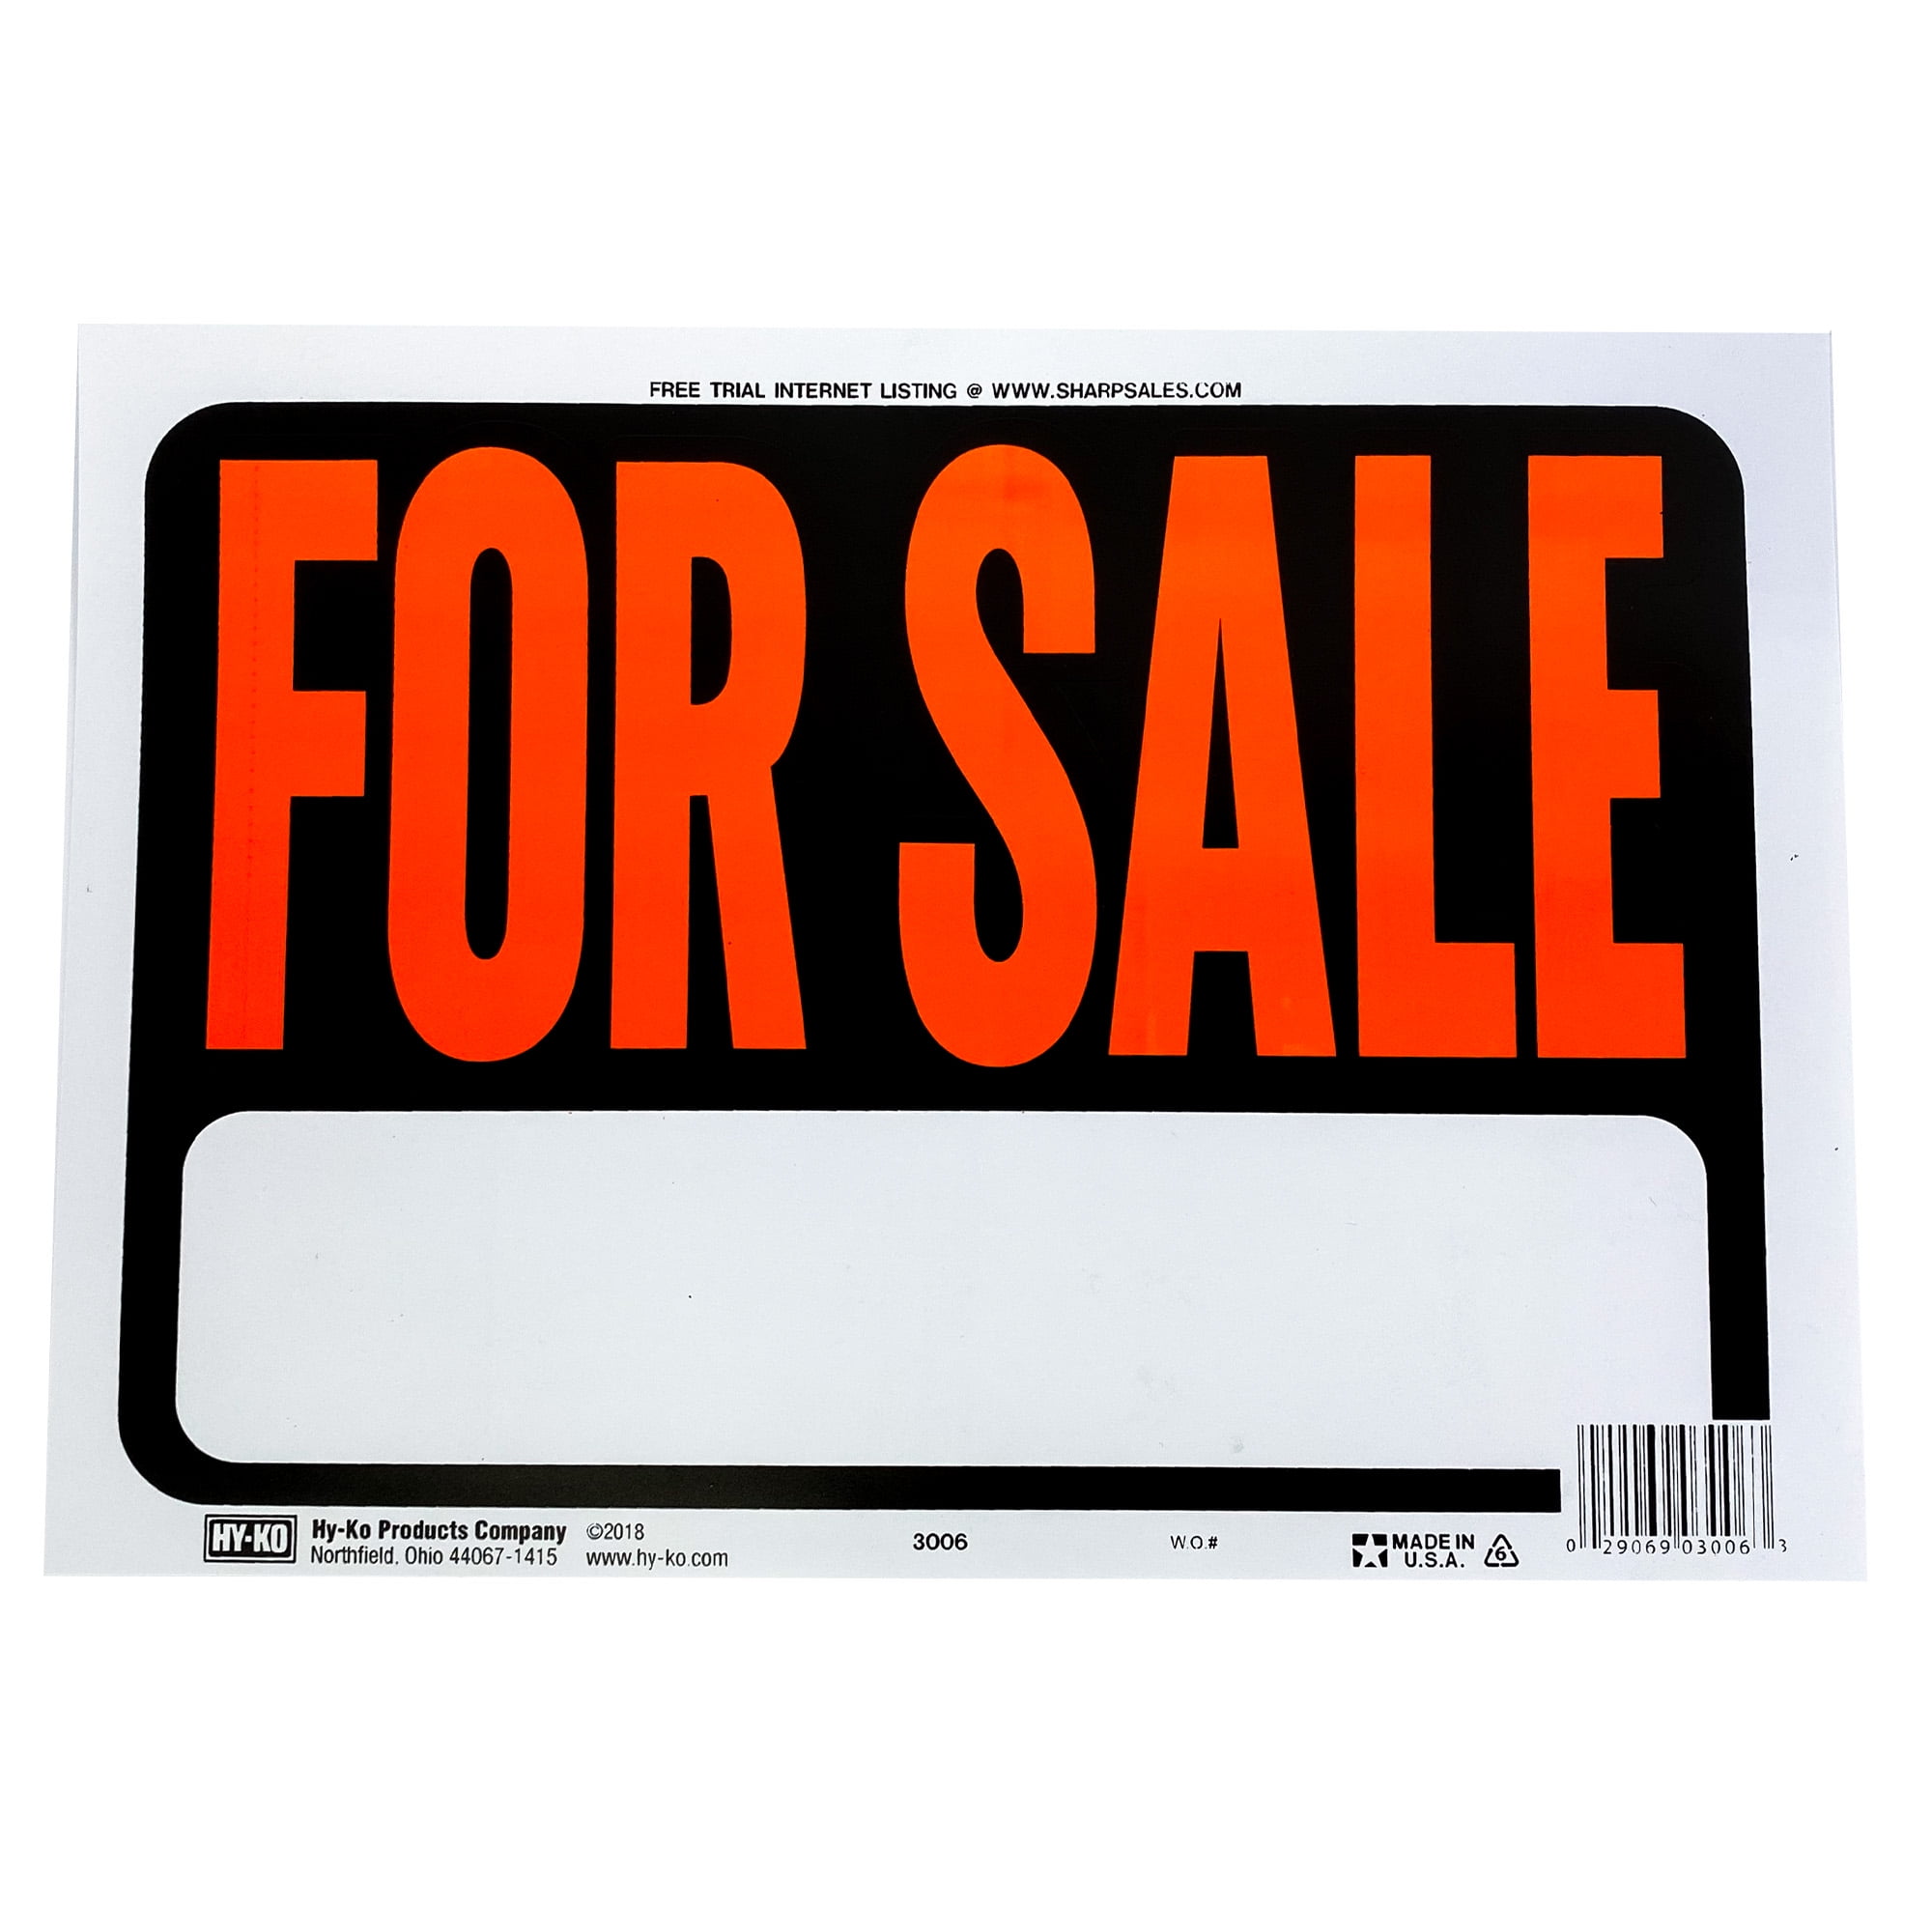 FOR SALE One sign 8" x 12" Flexible Plastic Business/Personal Use S2 